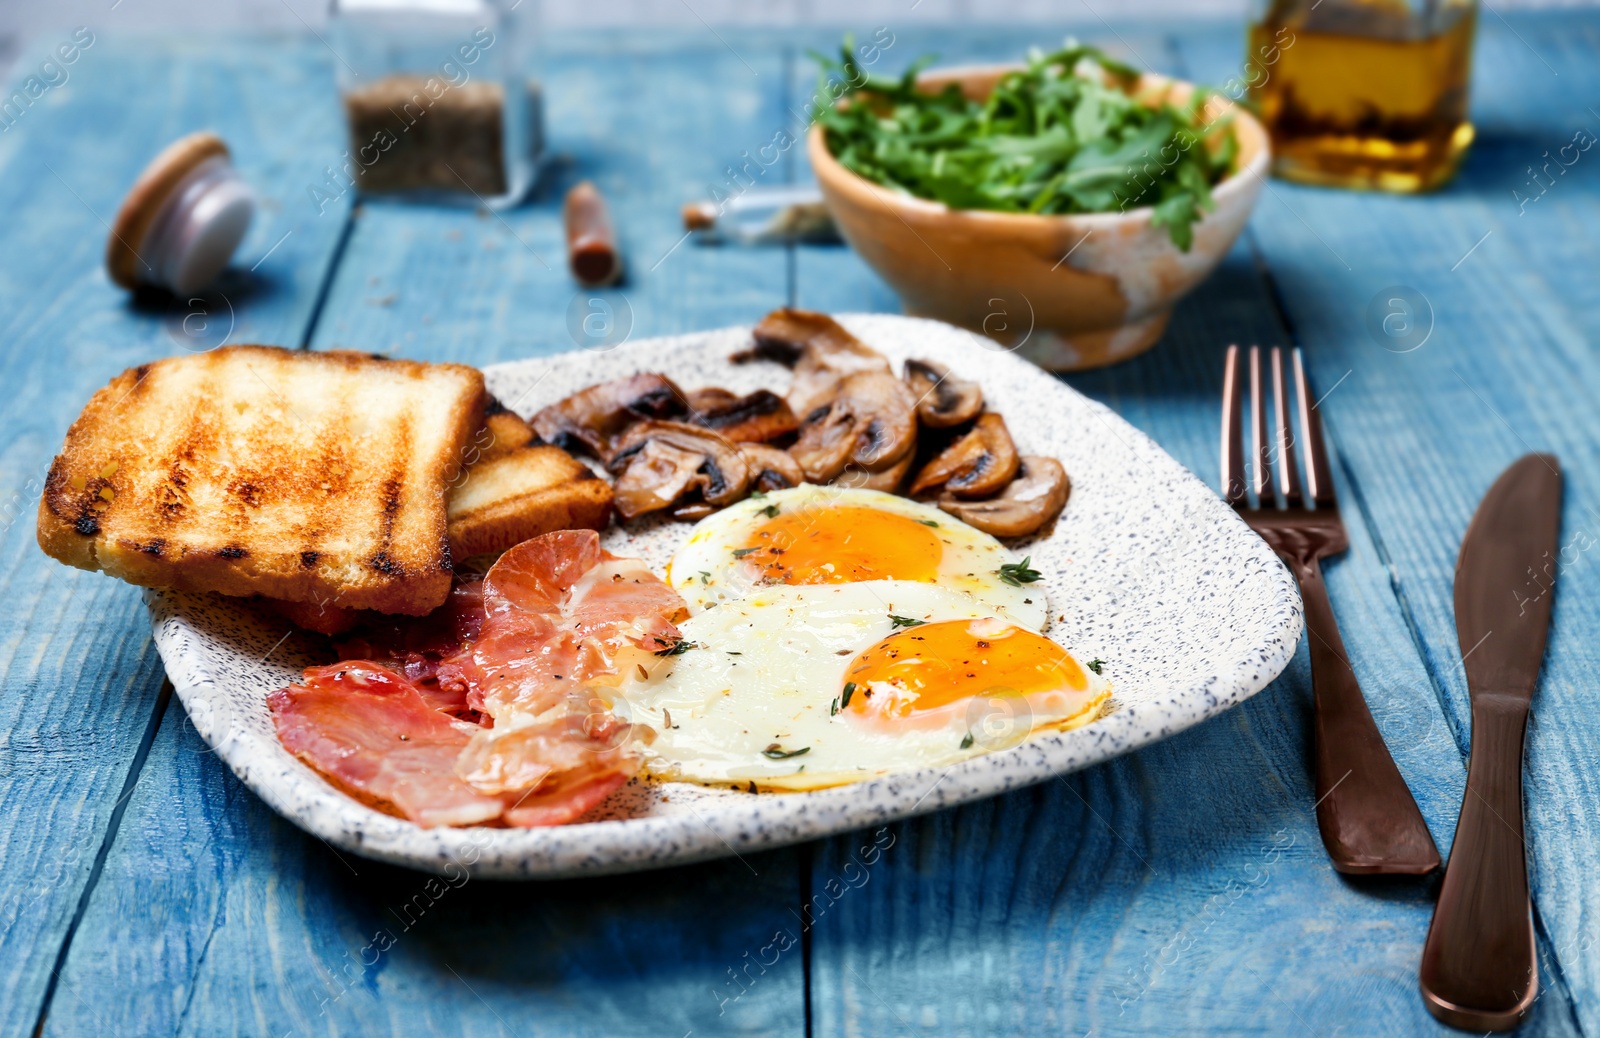 Photo of Plate with fried eggs, bacon, mushrooms and toasts on wooden background